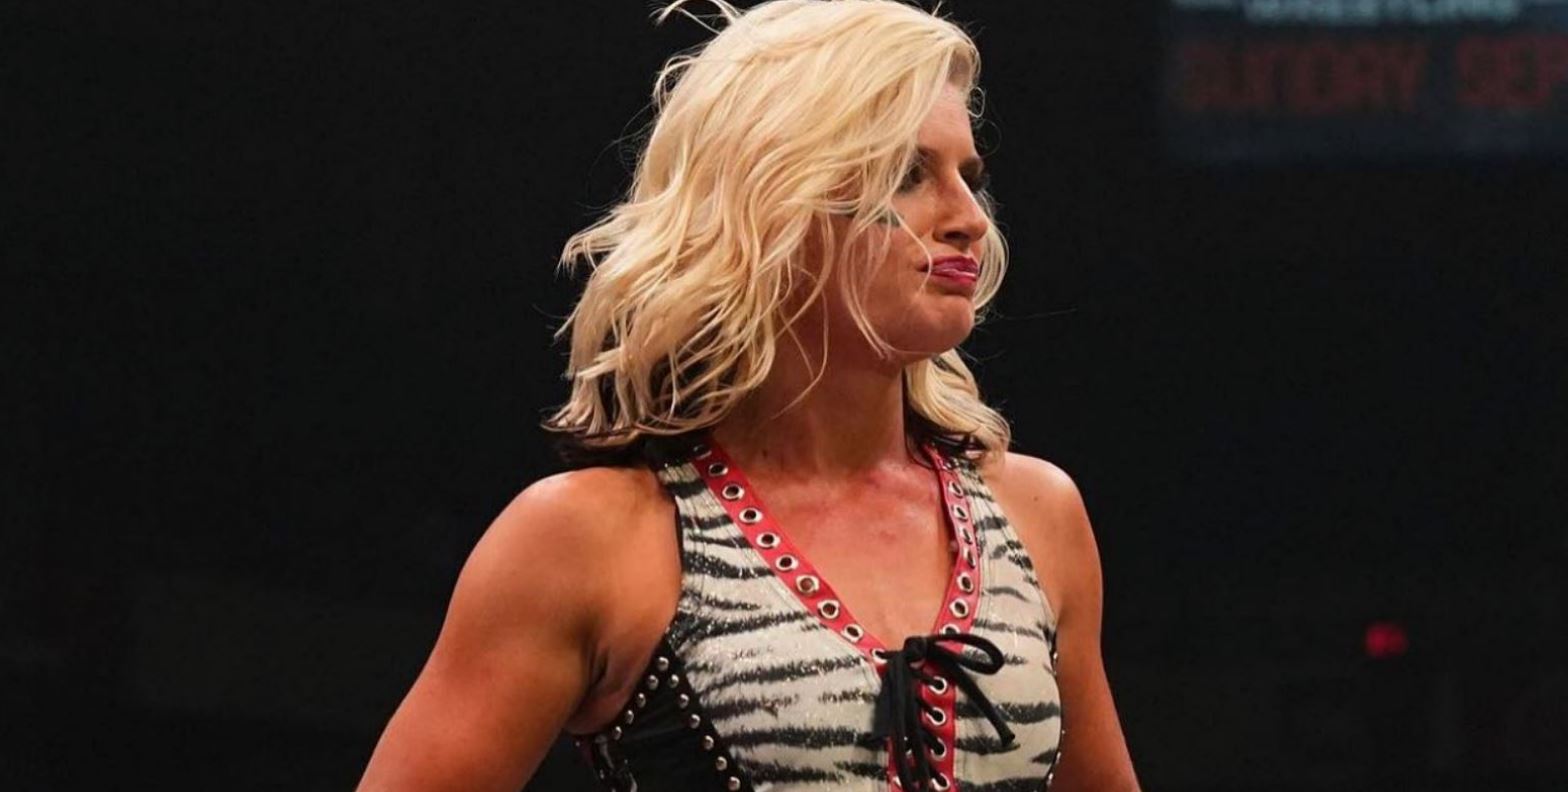 Toni Storm discusses the state of the AEW Women’s Division, how happy she is to be part of AEW